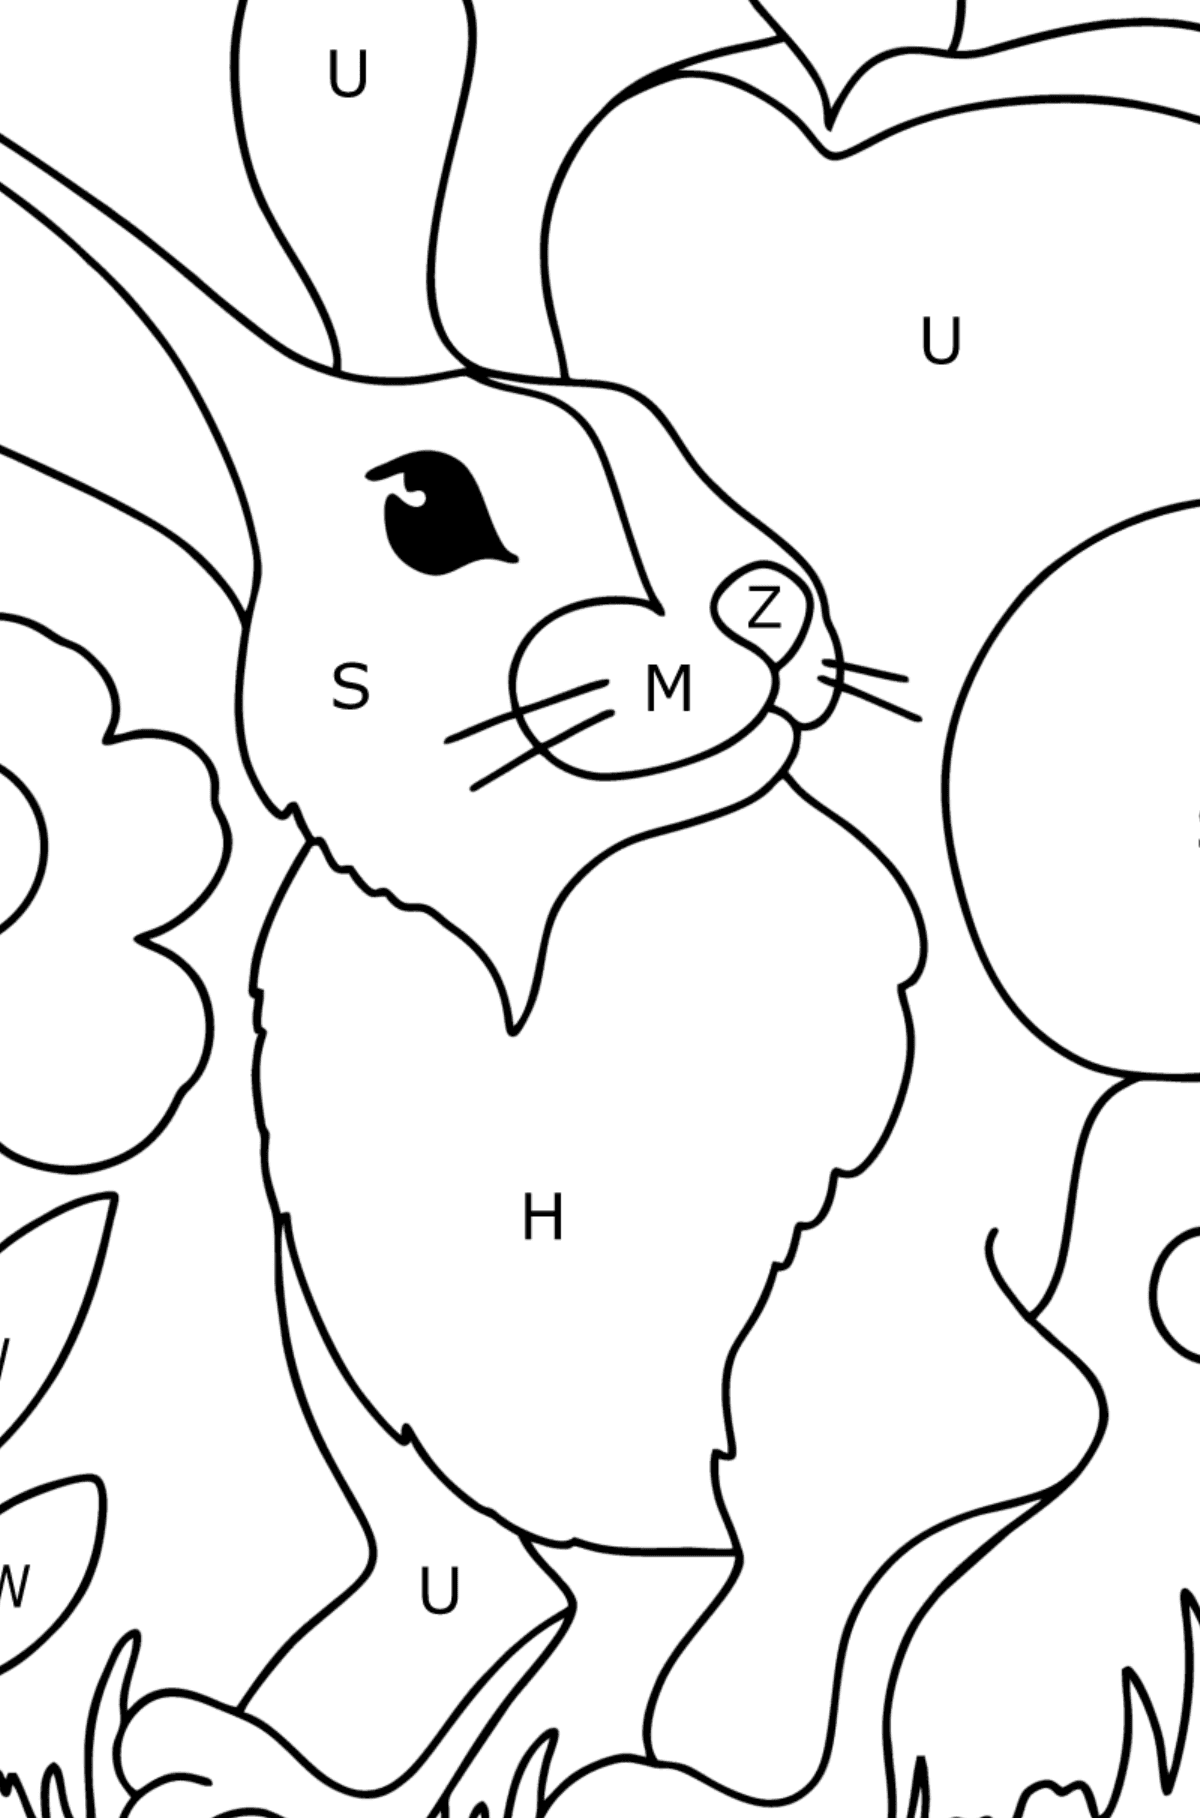 Cute Rabbit coloring page - Coloring by Letters for Kids